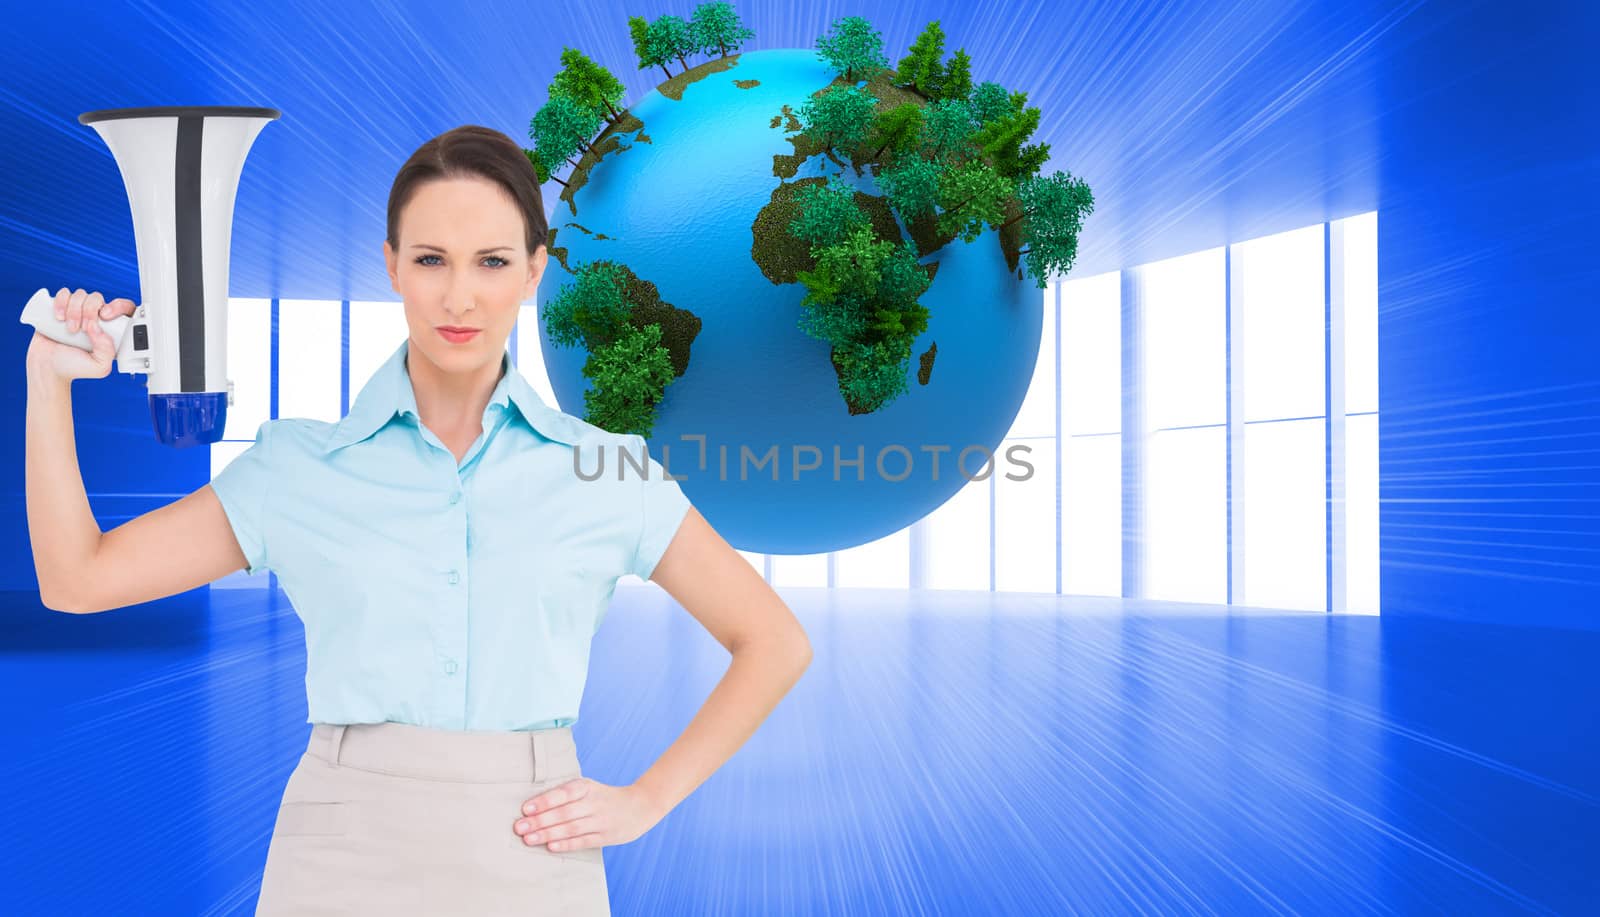 Composite image of stern classy businesswoman holding megaphone while posing